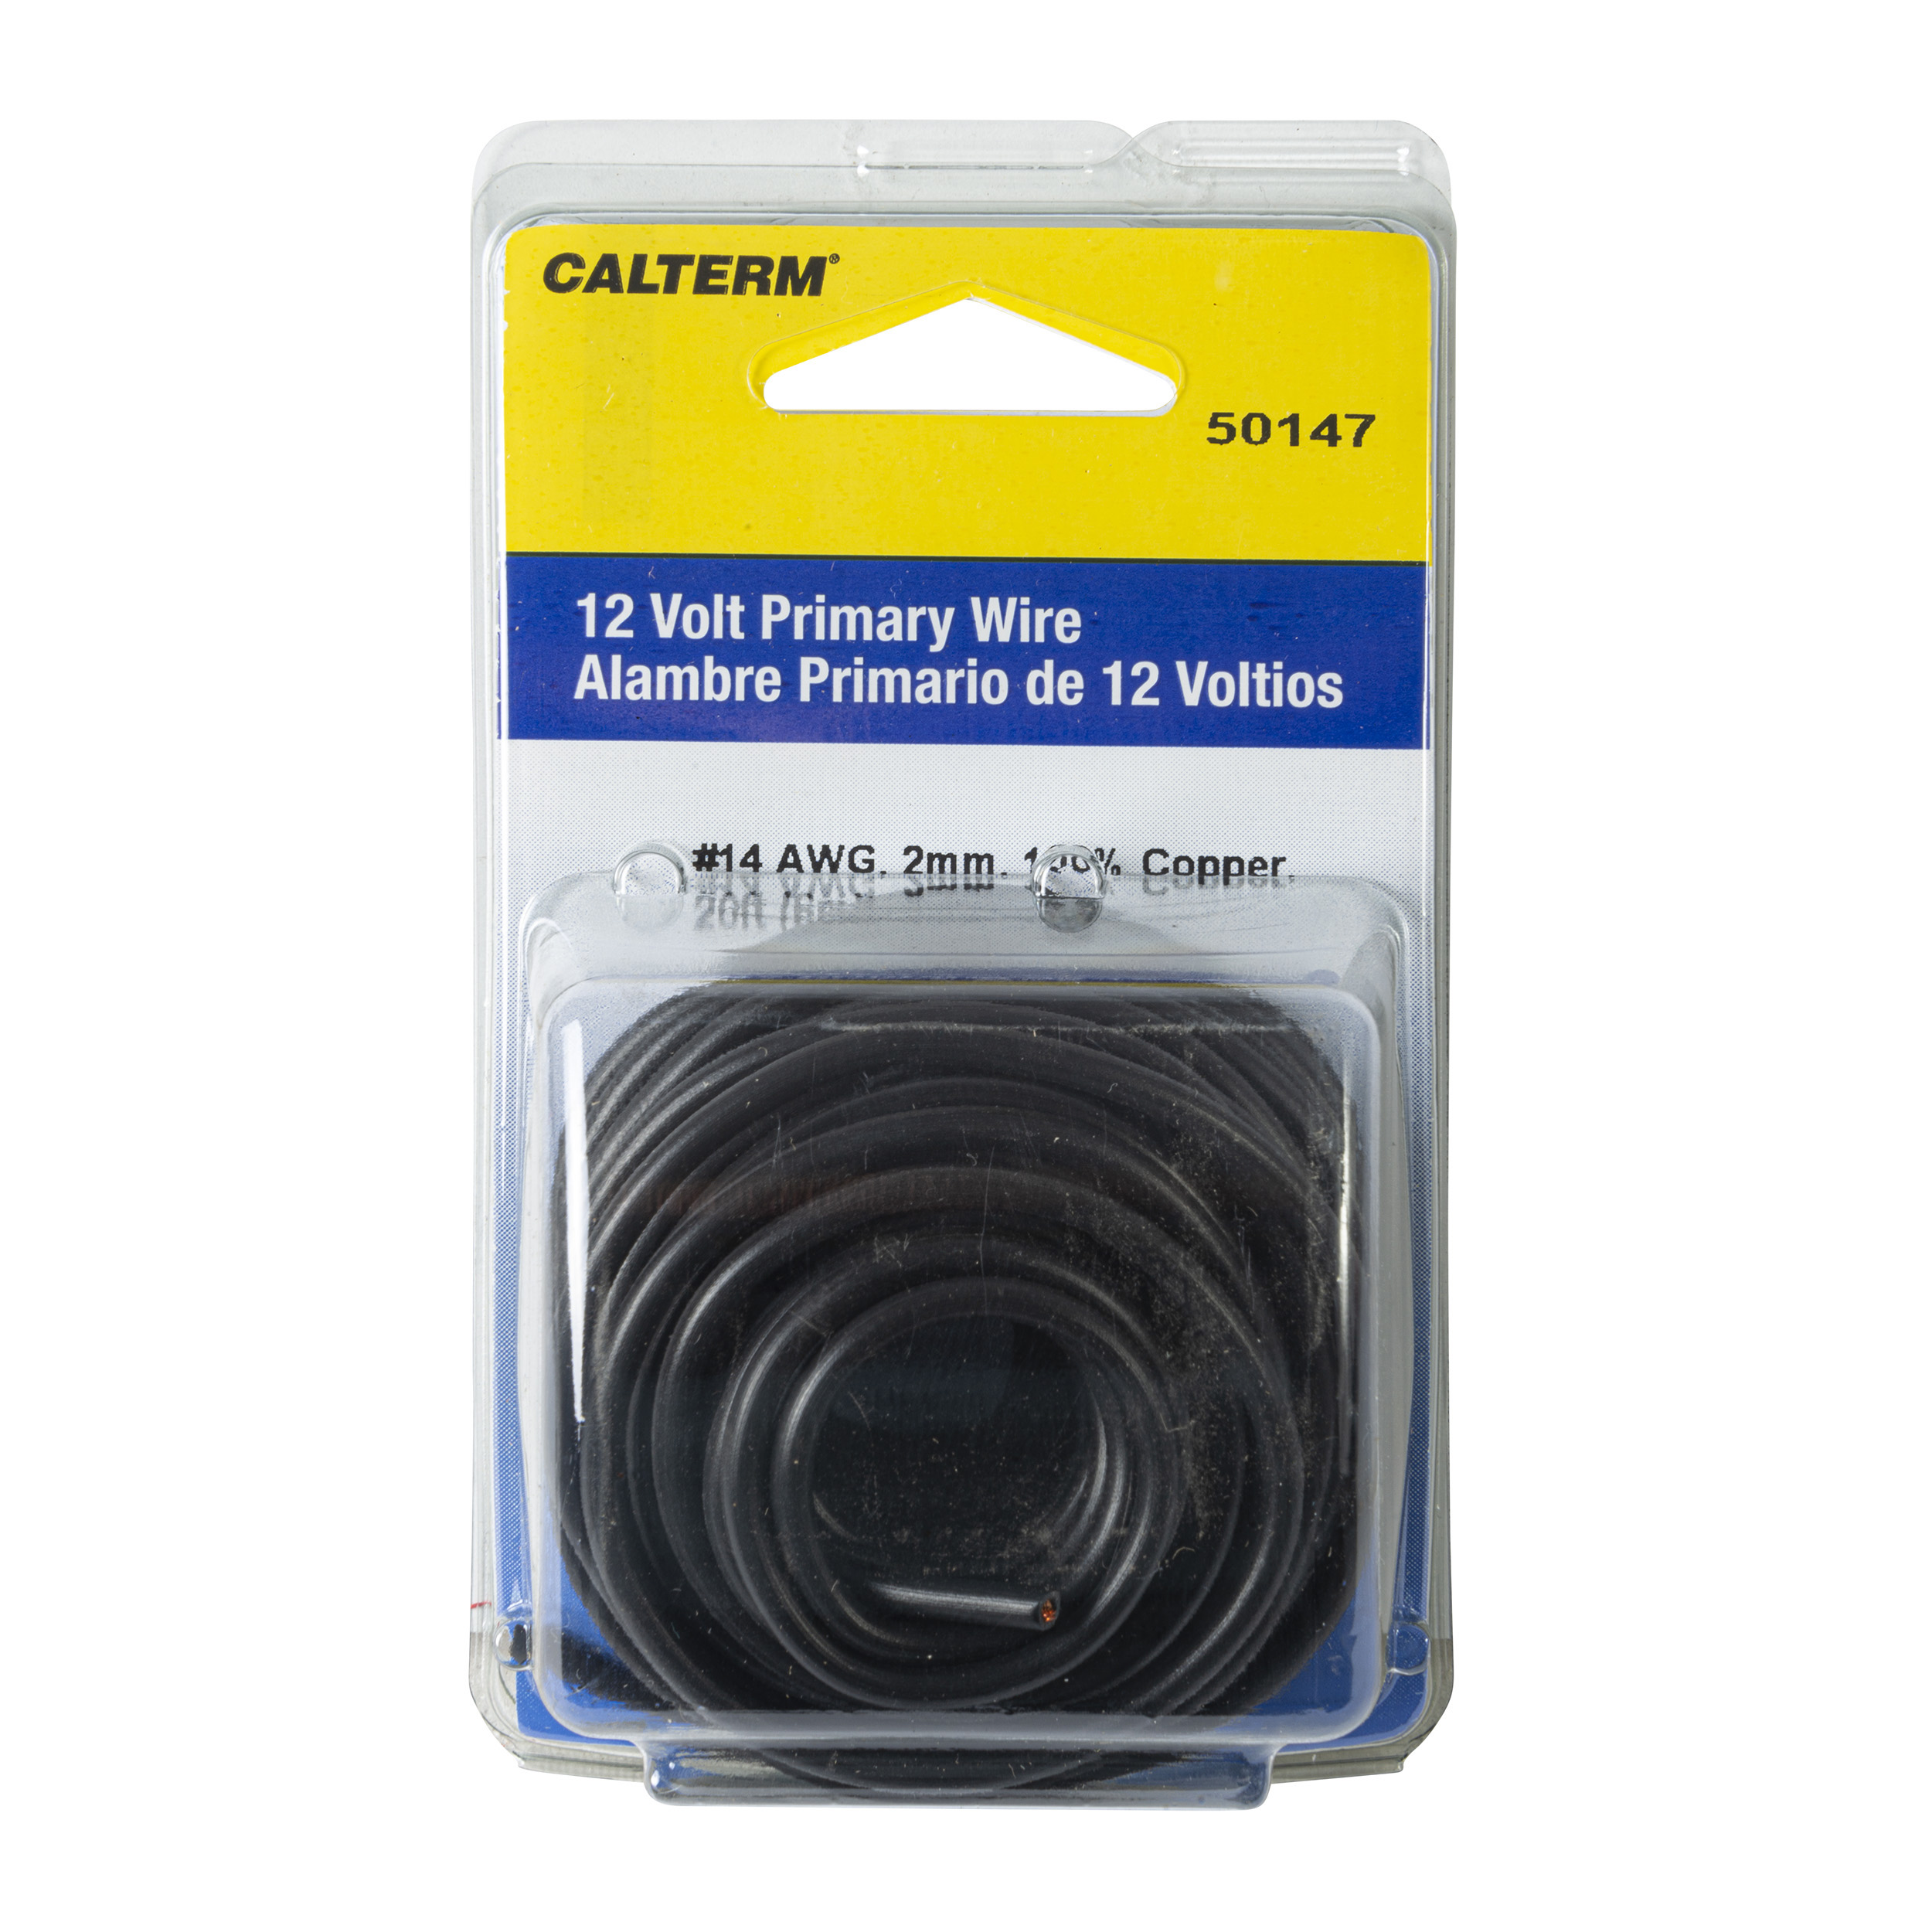 Calterm 50147 Electrical Primary Wire Black 20 ft. 14 AWG 